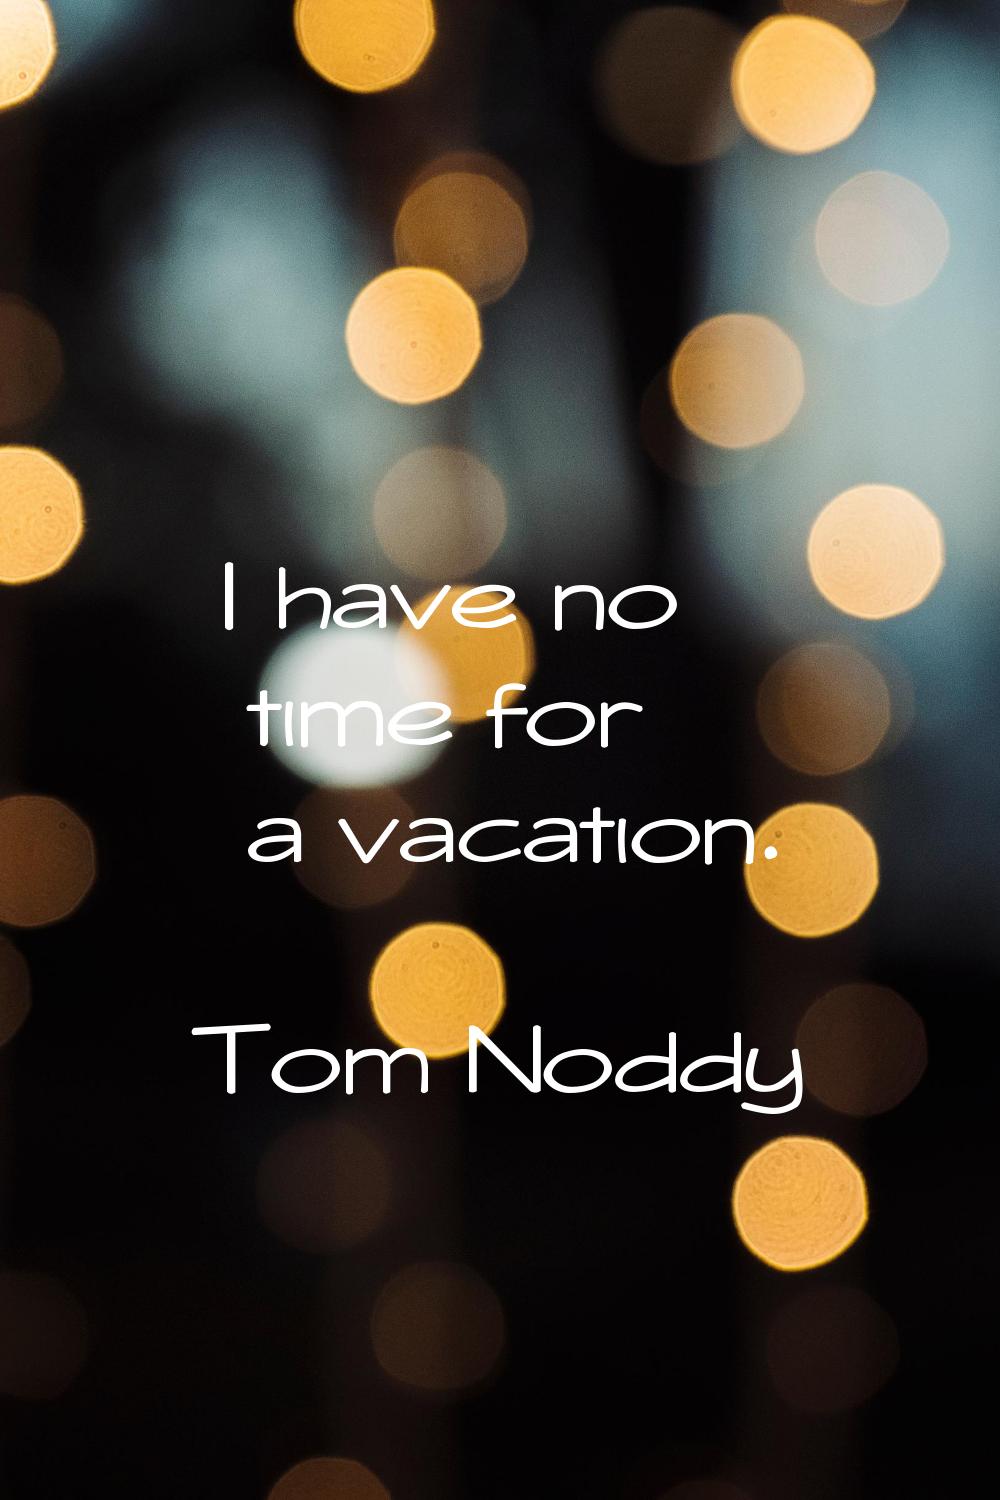 I have no time for a vacation.